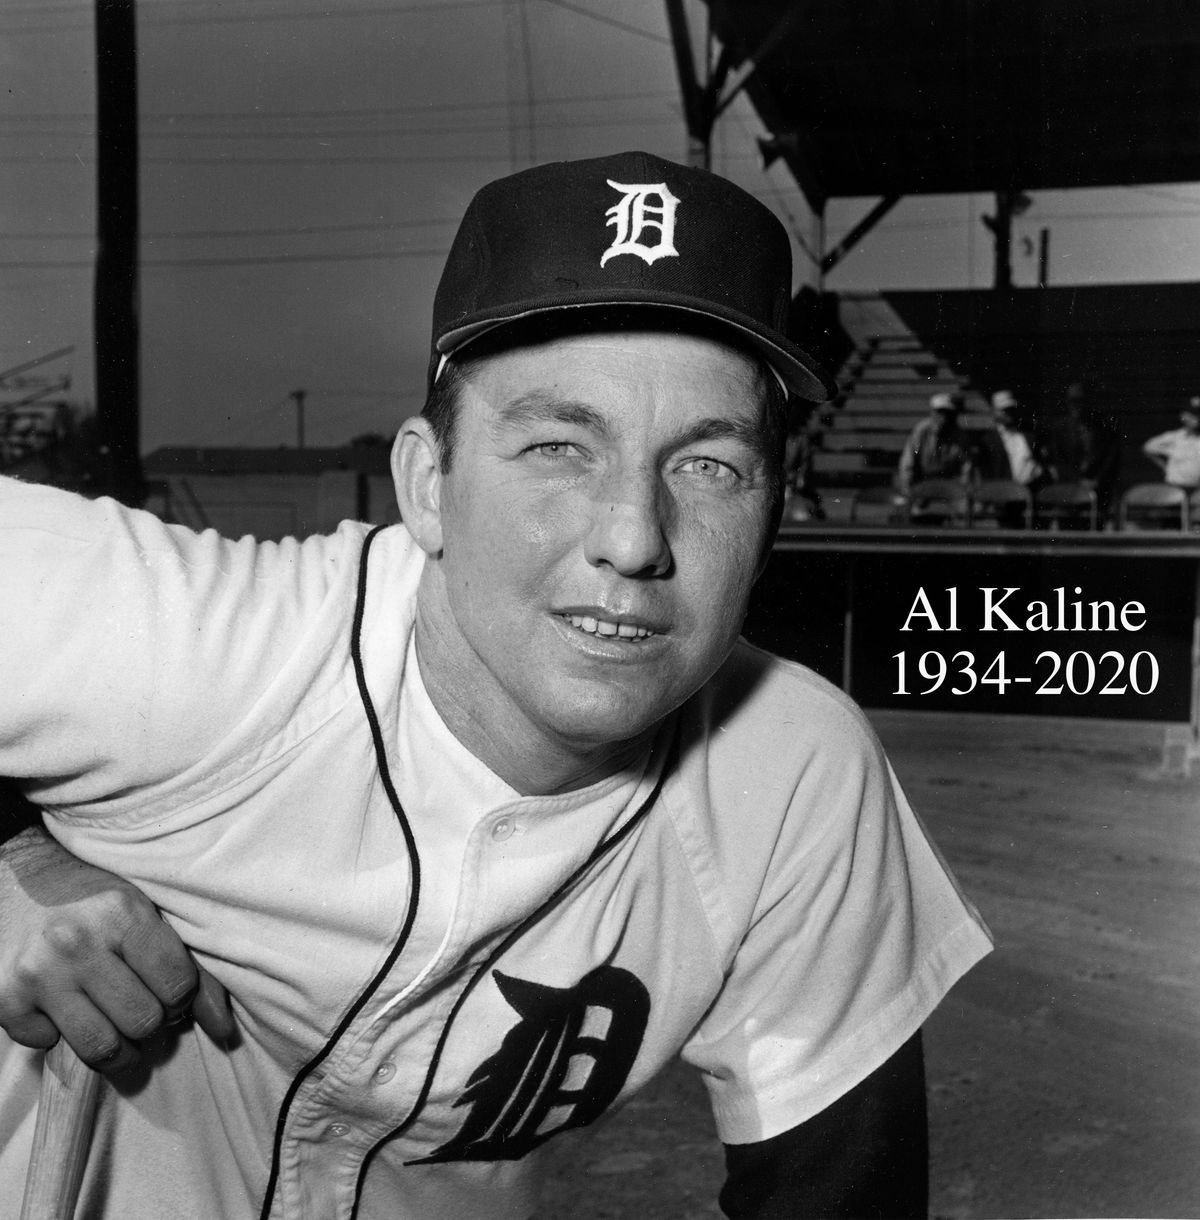 RIP Al Kaline. You Were The Greatest Player Time Forgot